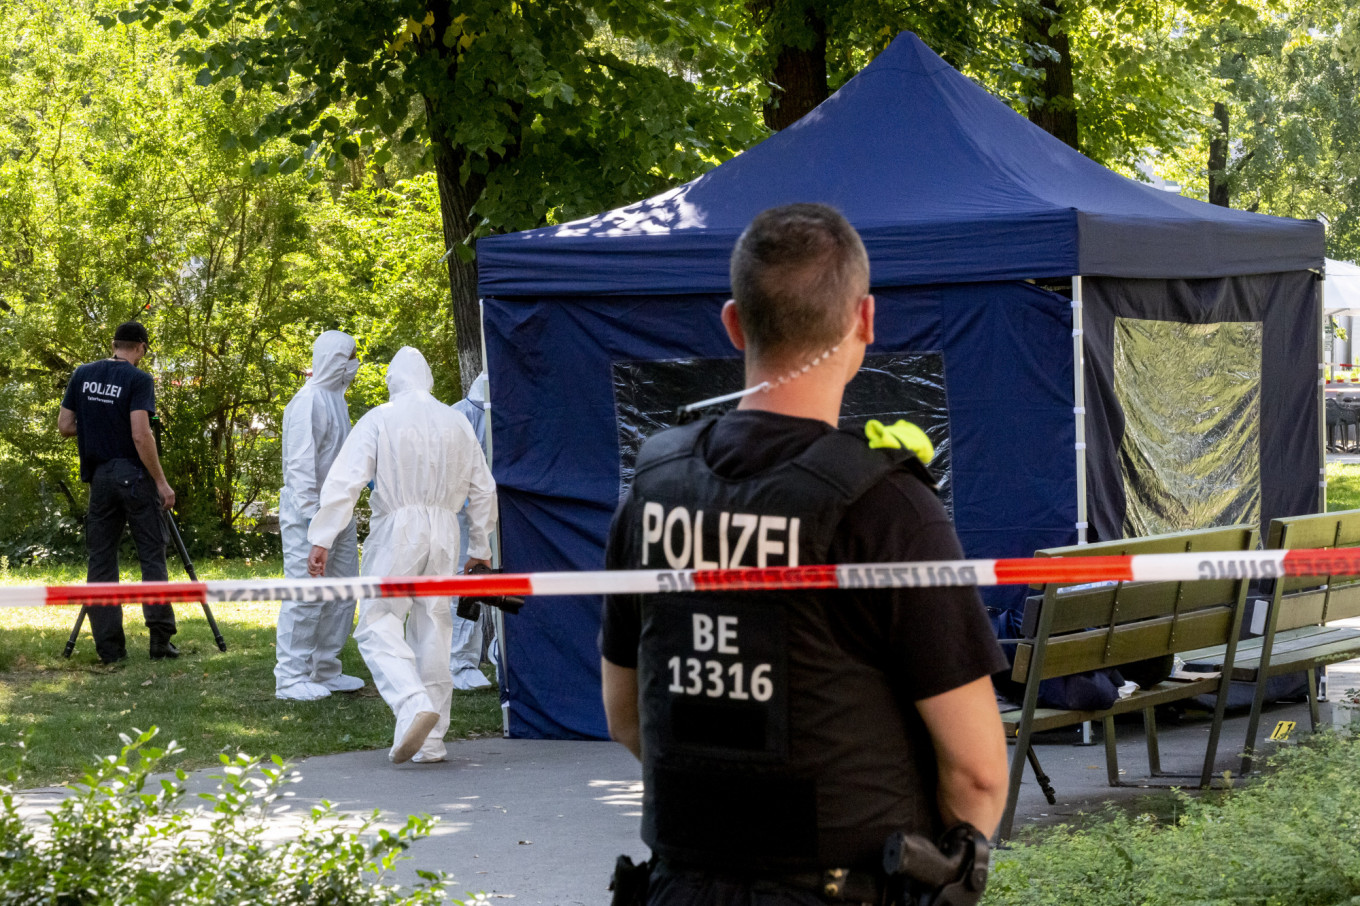 Berlin Expels 2 Russian Diplomats Over ‘State-Ordered Killing’ – The Moscow Times